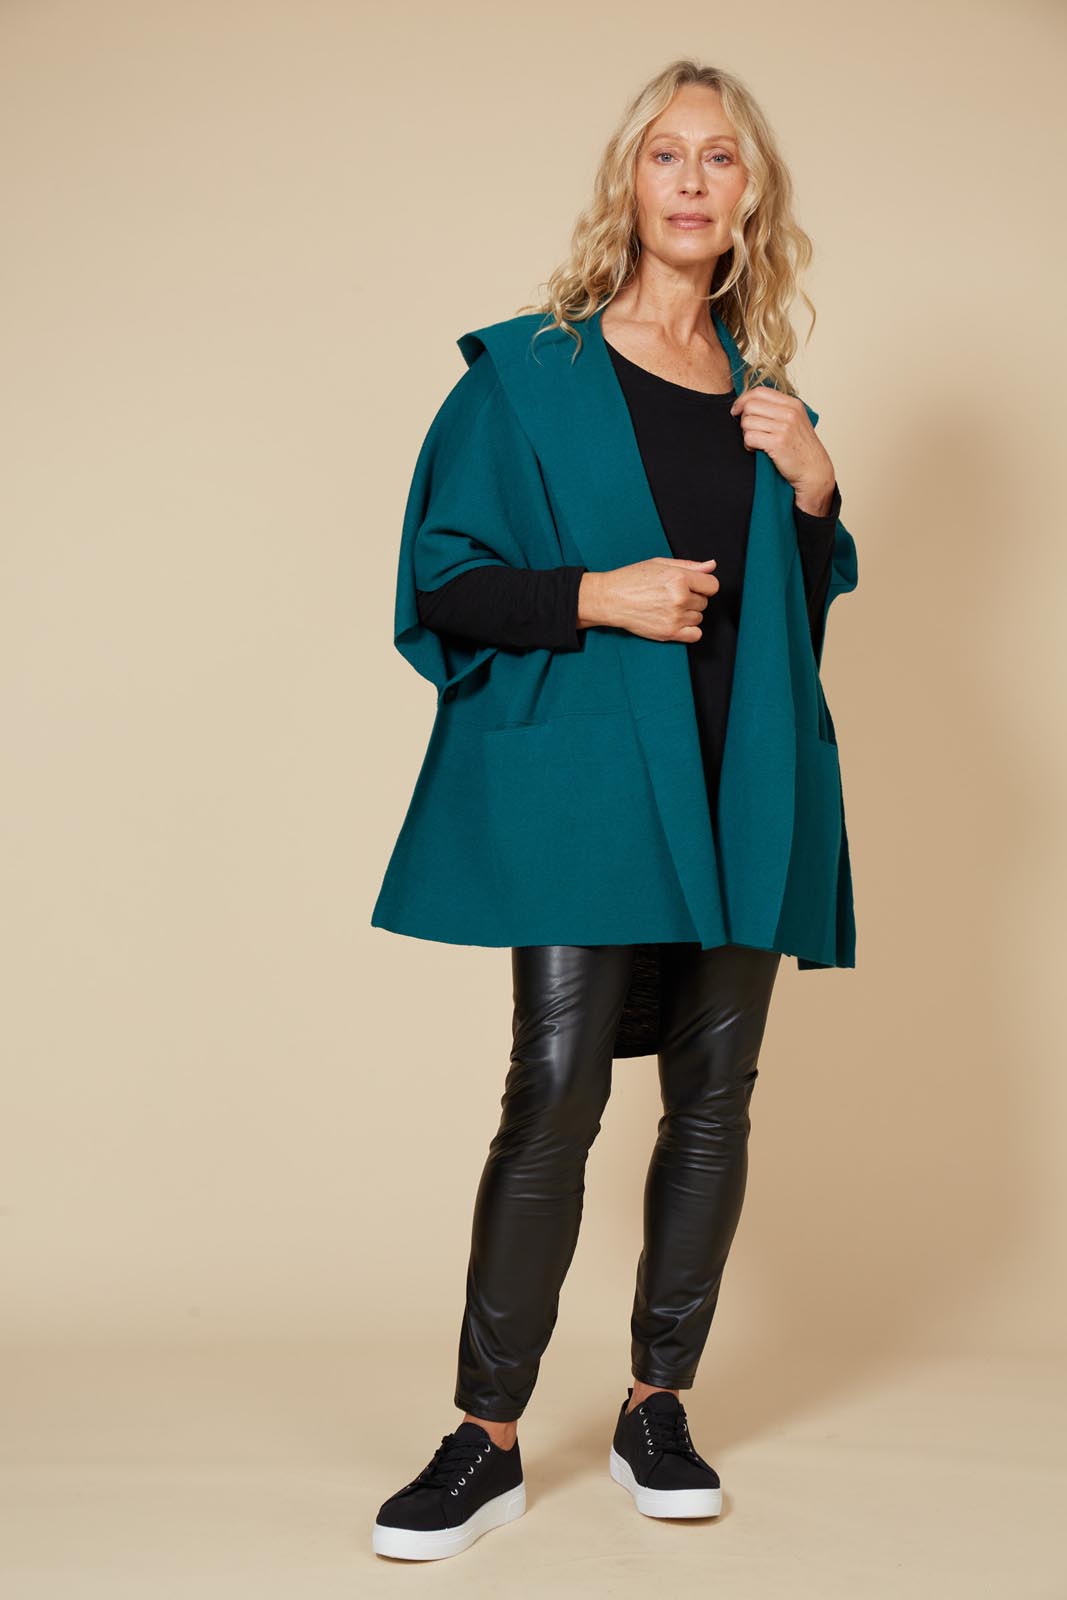 Kit Cape - Teal - eb&ive Clothing - Knit Cape One Size